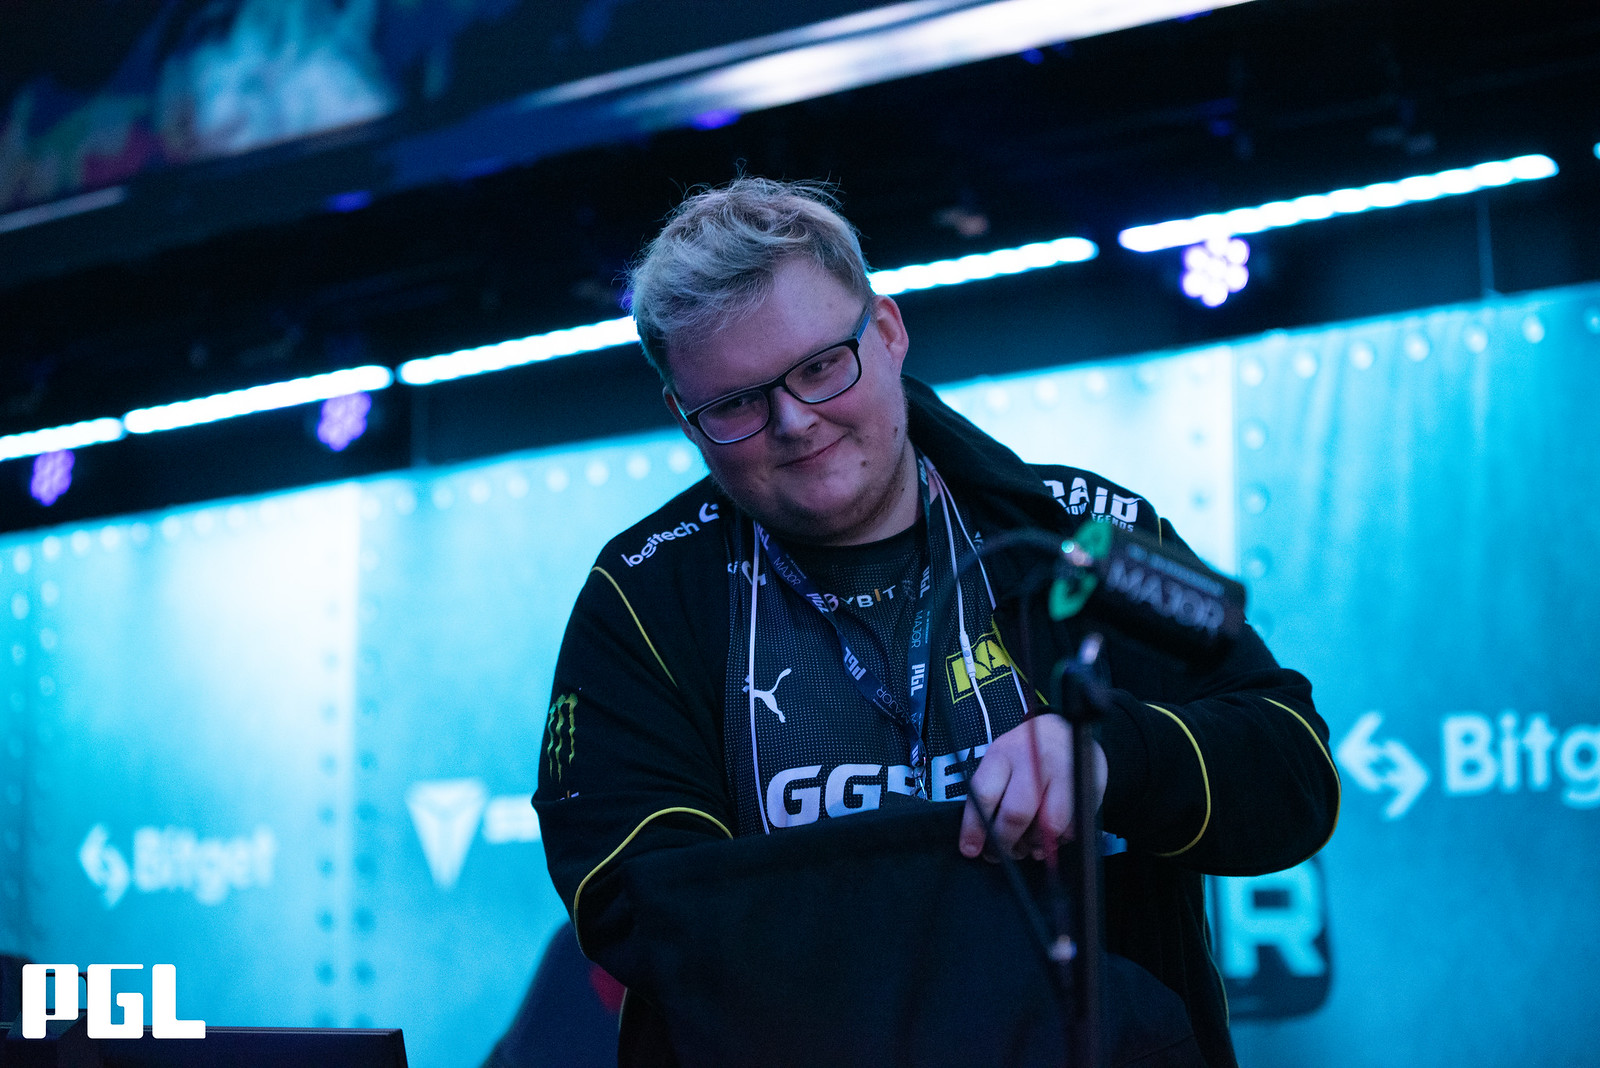 Boombl4 has been working with BetBoom Esports for some time now